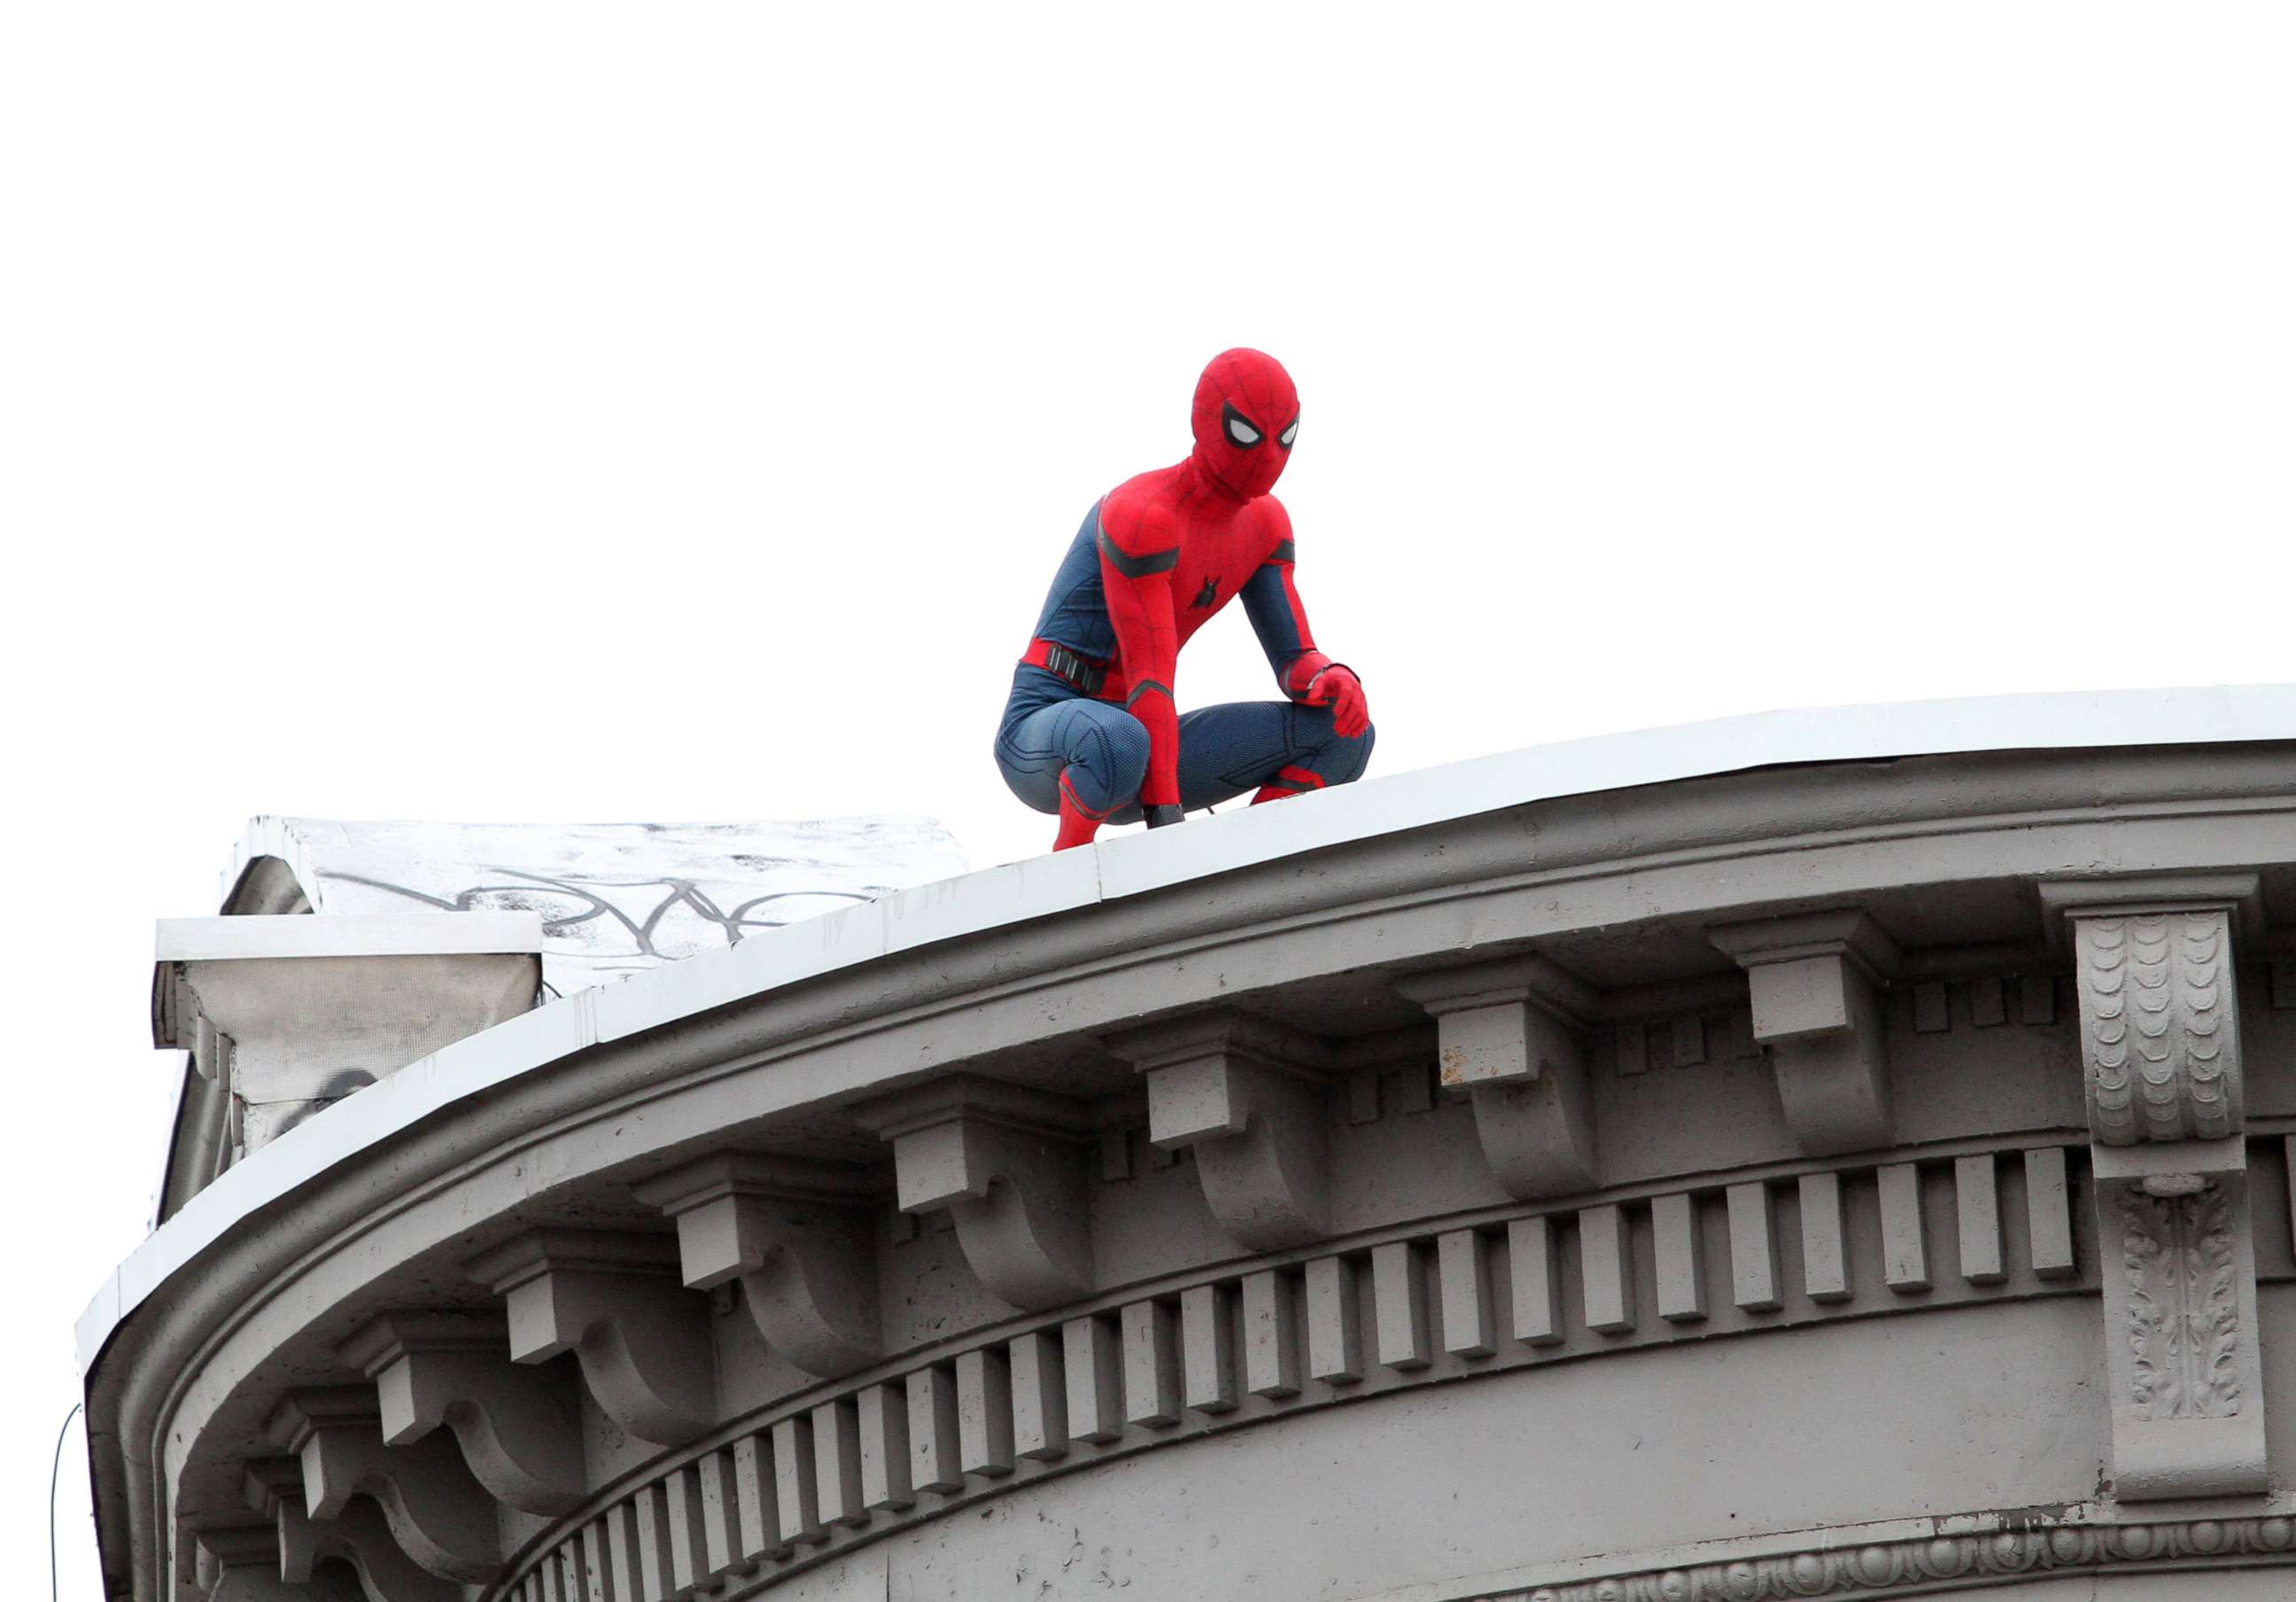 PHOTO: In this Sept. 30, 2016, file photo, Tom Holland stands on the ledge of a building in costume as he continues to shoot scenes for the upcoming movie "Spider-Man: Homecoming" in Queens, New York.